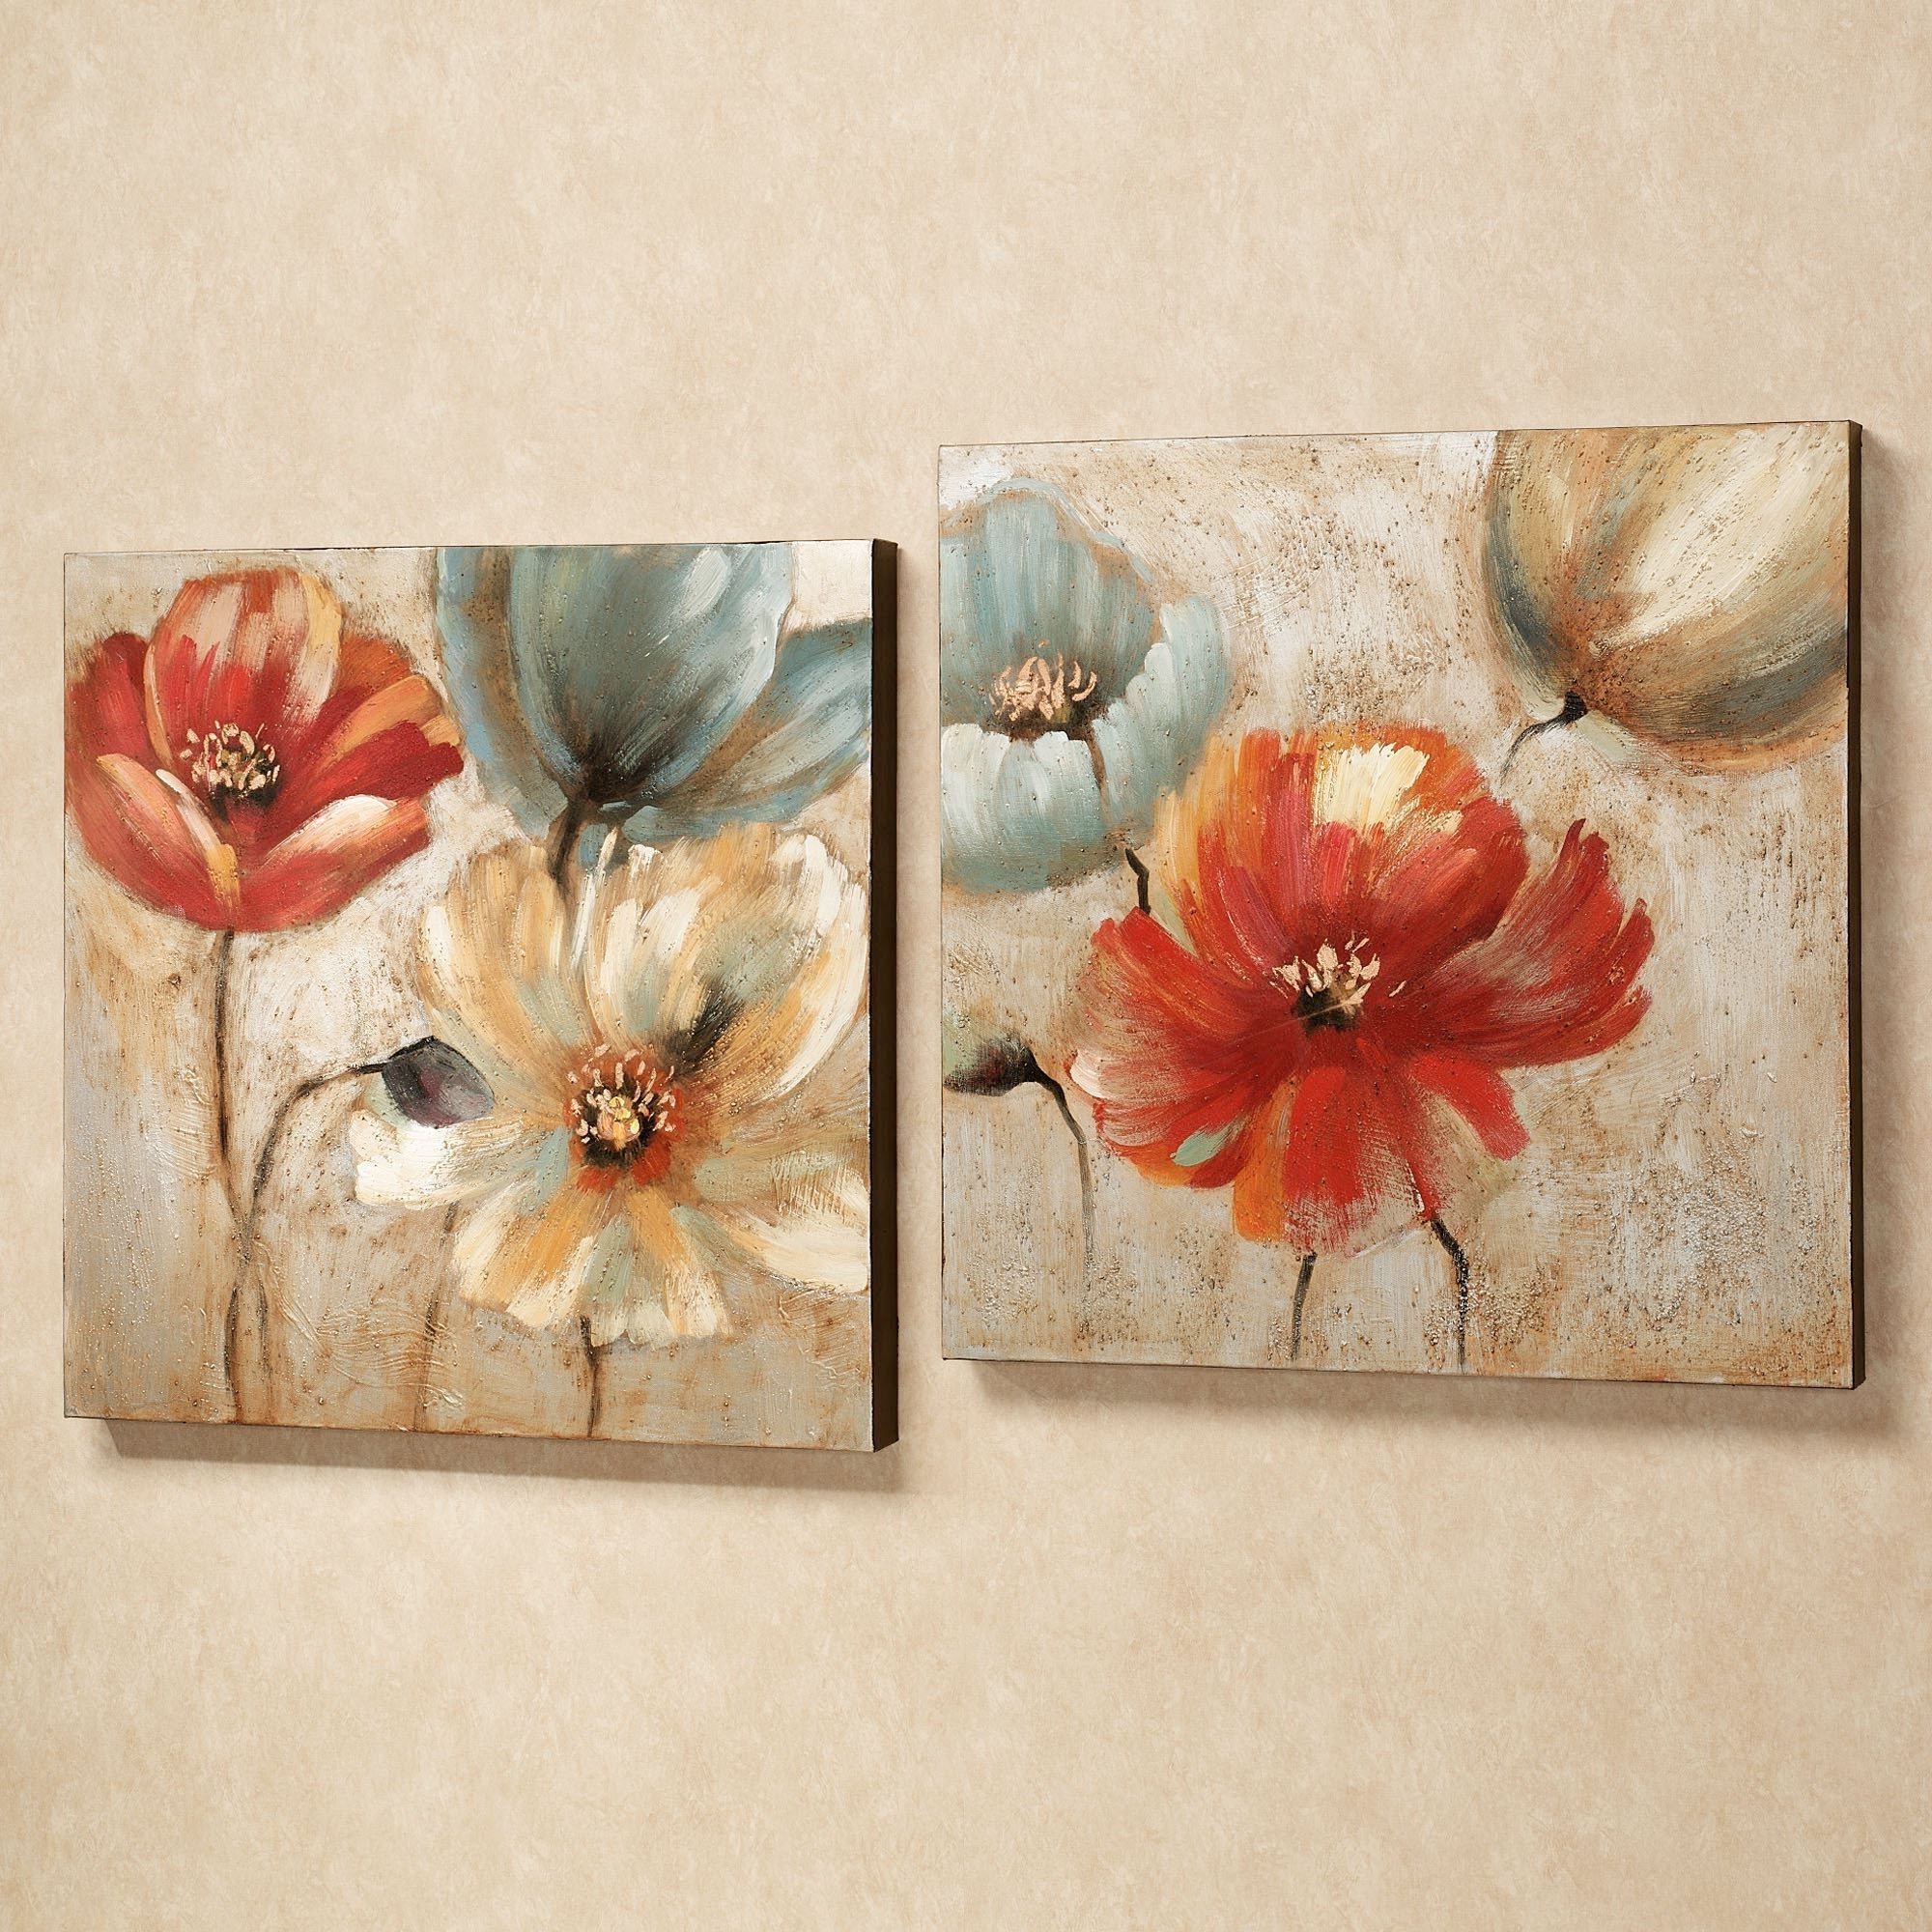 Flower Wall Art Canvas Intended For Most Up To Date Joyful Garden Floral Canvas Wall Art Set (View 2 of 15)